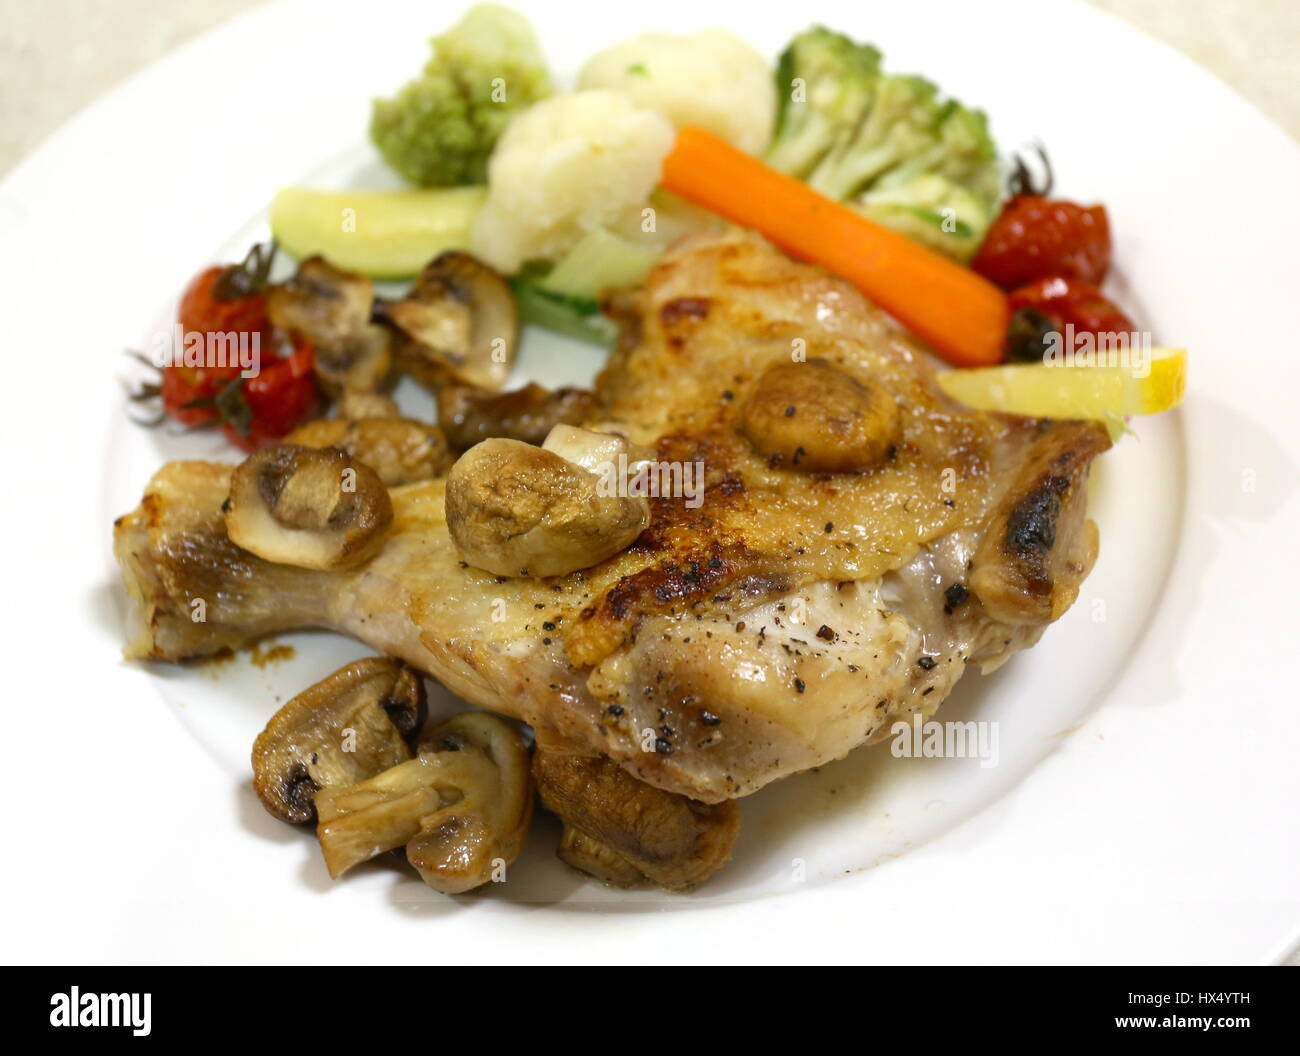 Oven grilled chicken leg and mushrooms, served with steamed cauliflower, courgette,carrot, cherry tomatoes and romanesco broccoli, Stock Photo